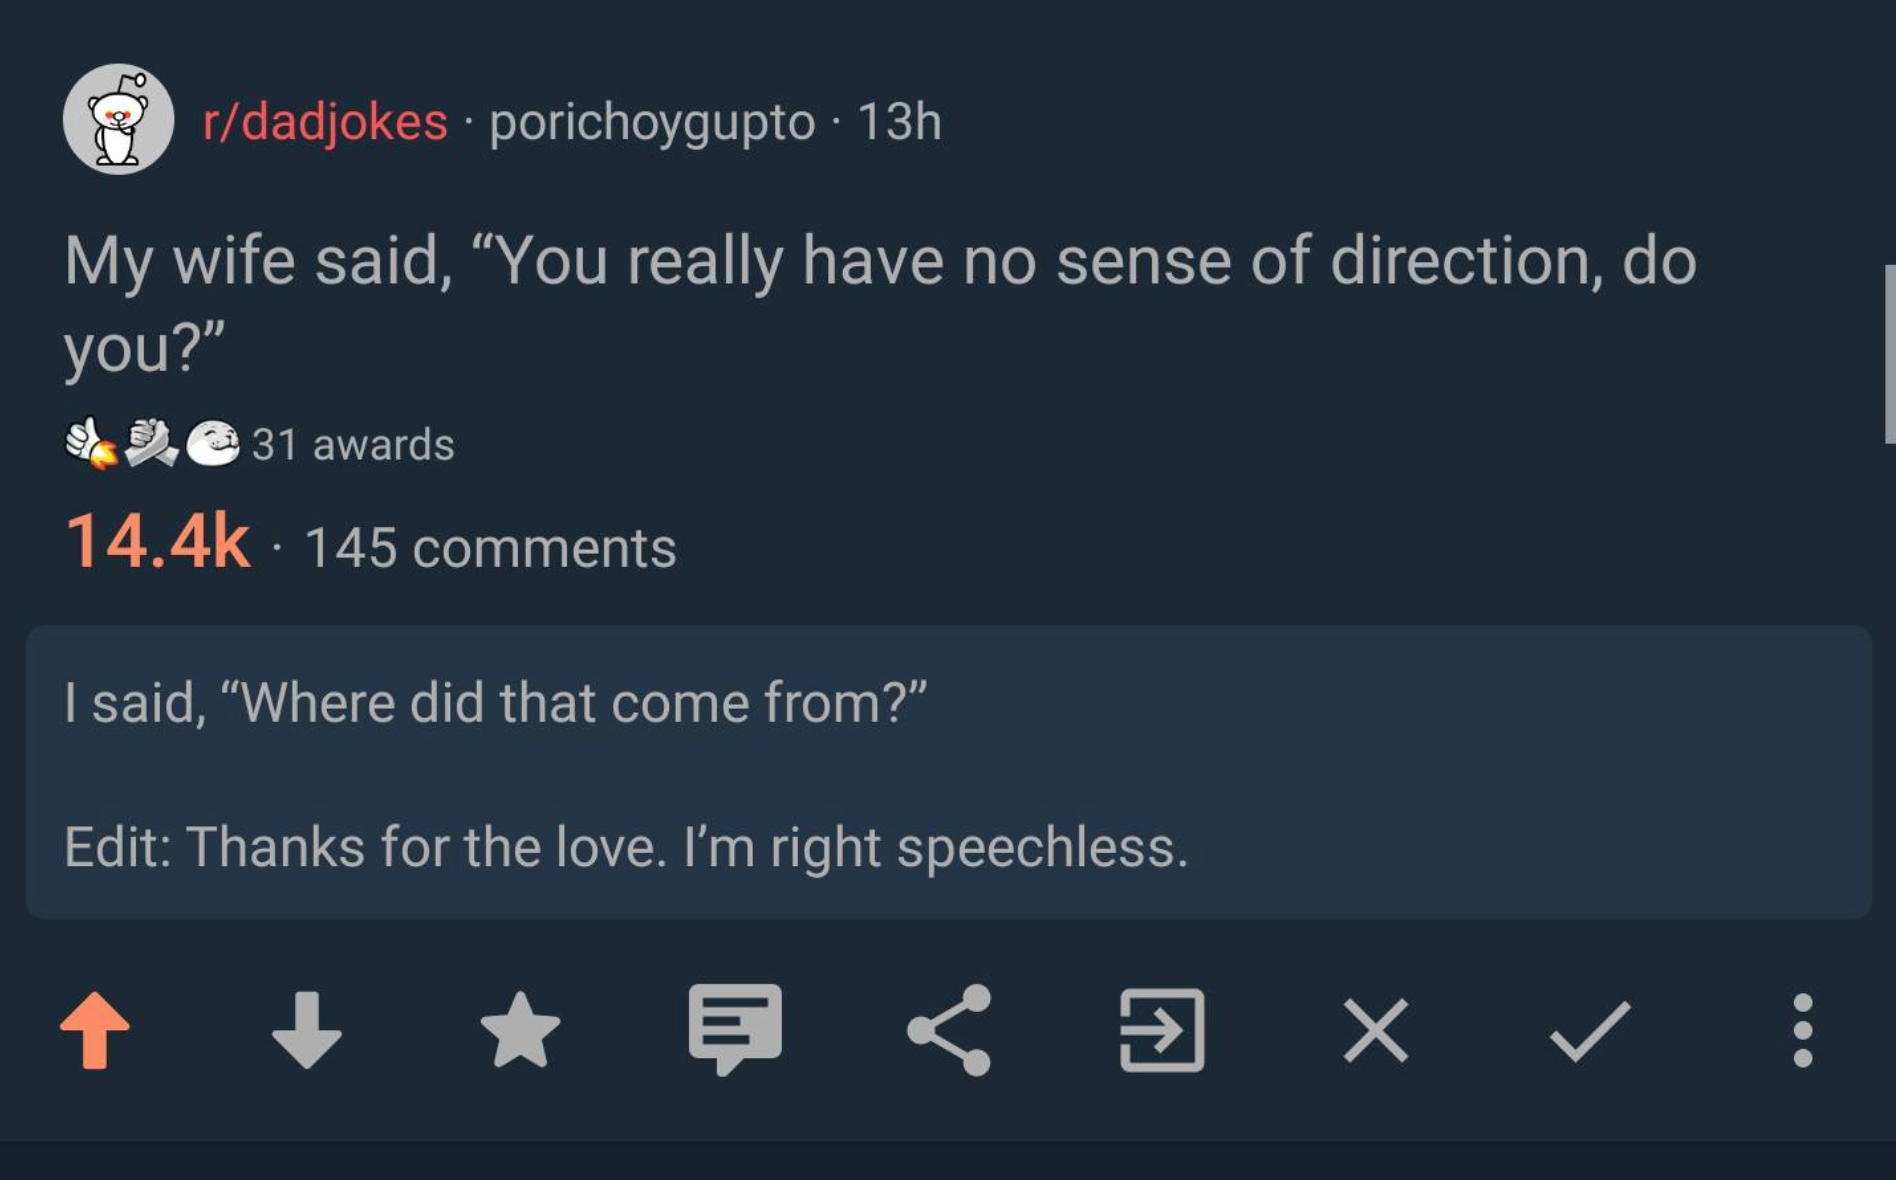 screenshot - rdadjokes . porichoygupto . 13h My wife said, You really have no sense of direction, do you?" 2e 31 awards . 145 I said, "Where did that come from?" Edit Thanks for the love. I'm right speechless. ooo